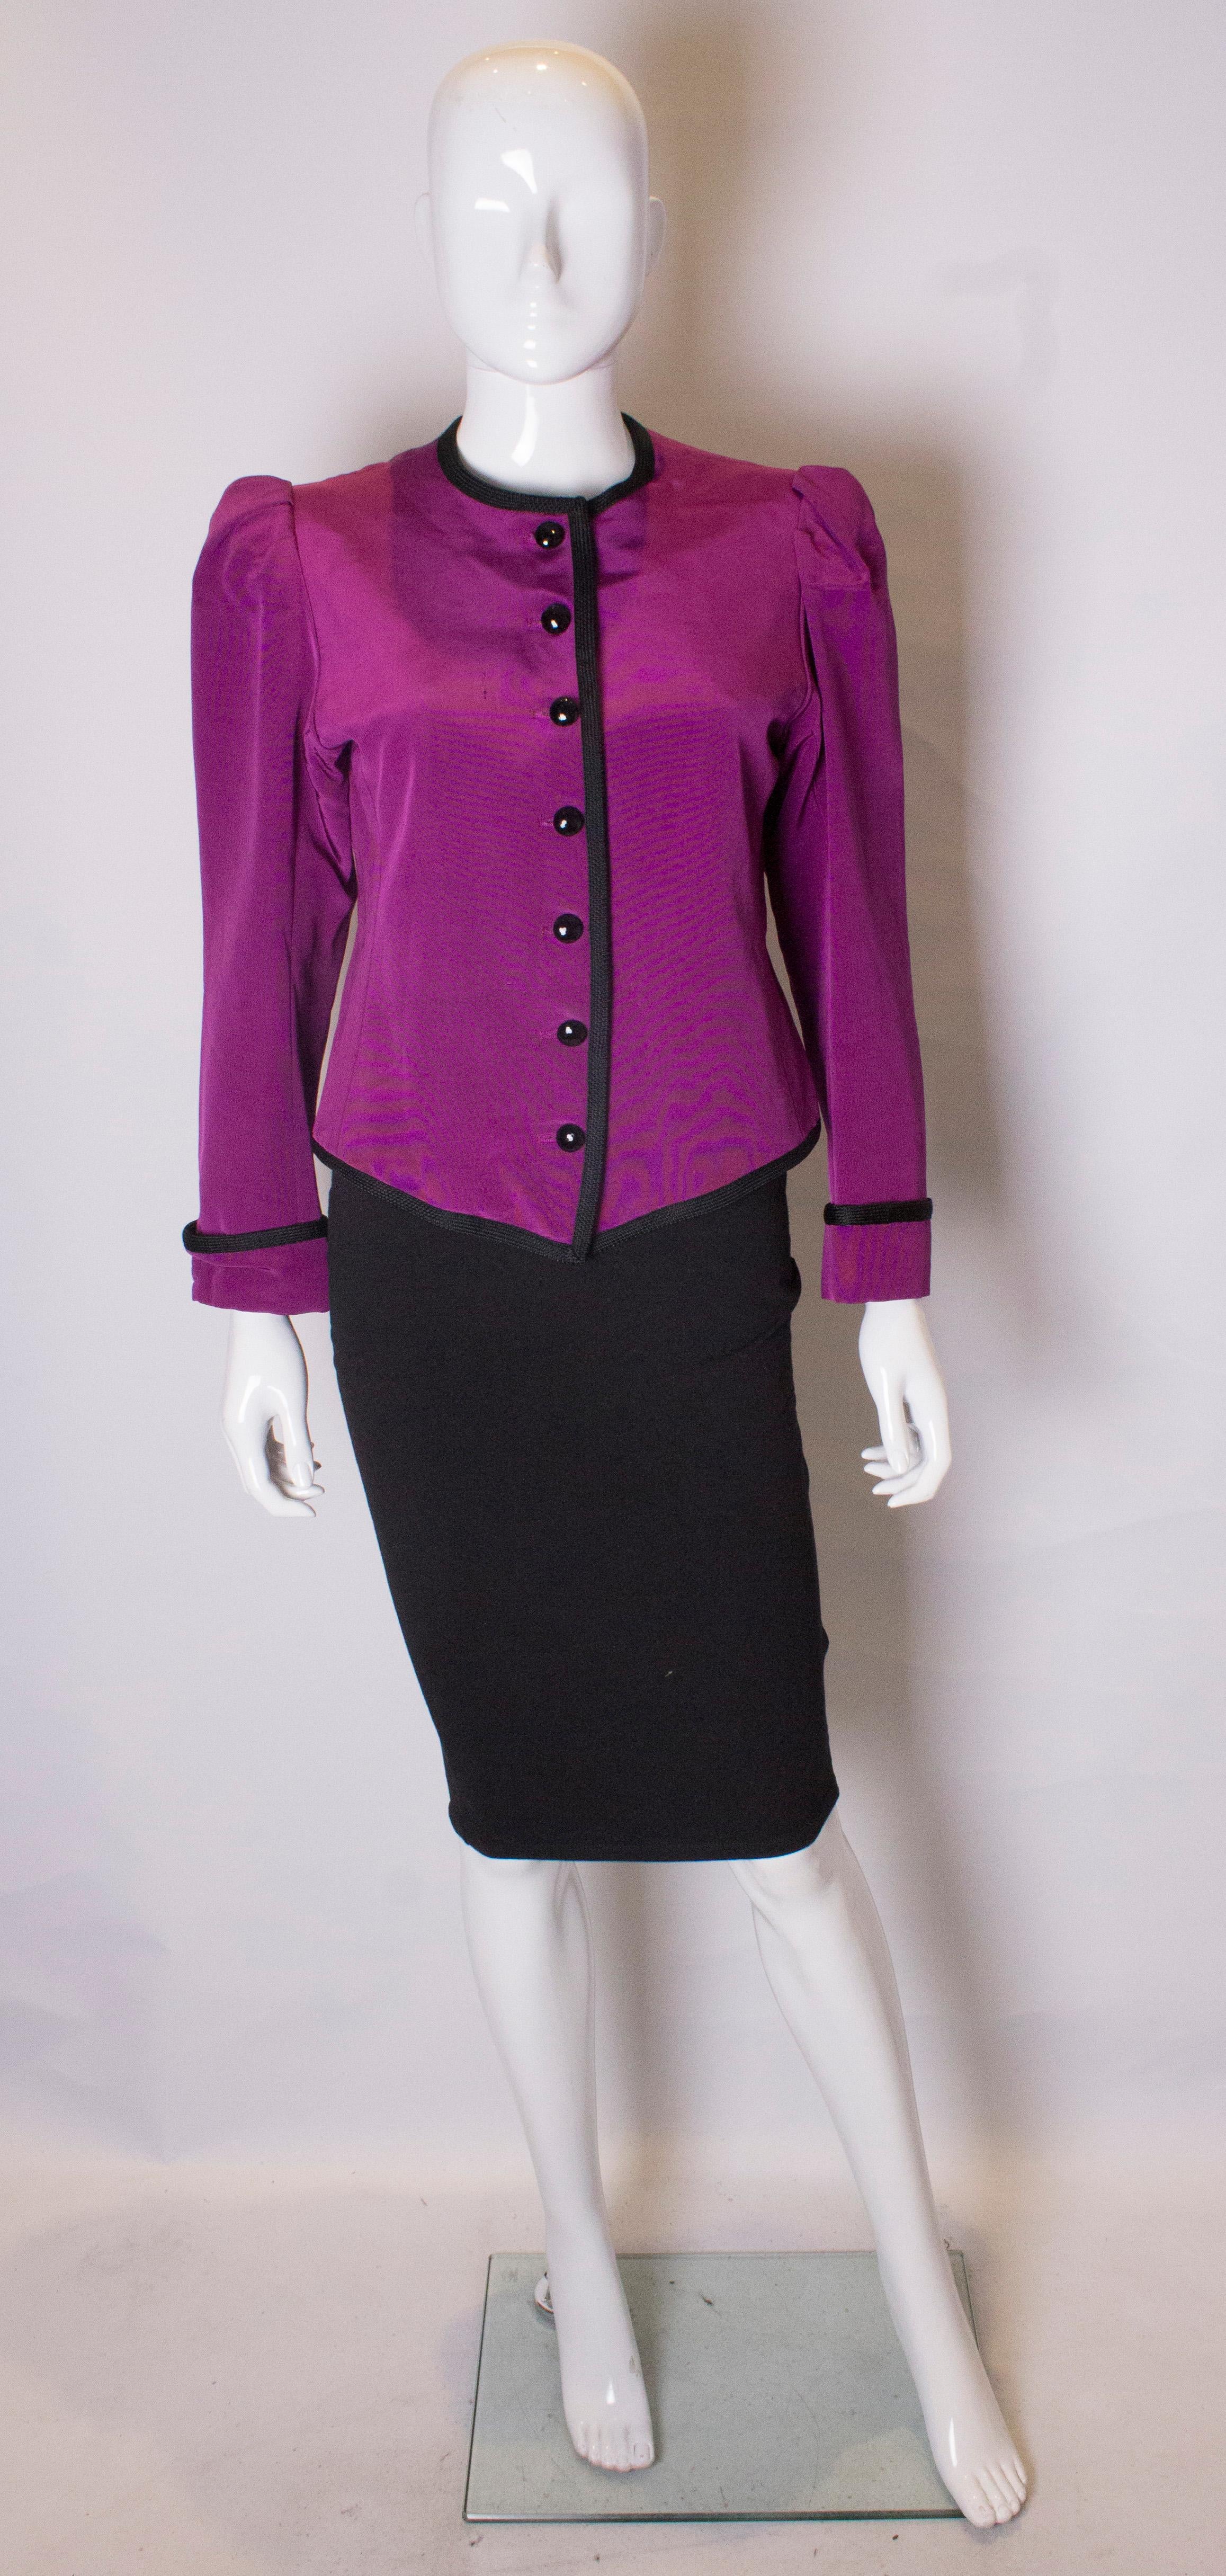 A great jacket for fall /winter by Yves saint Laurent, Rive Gauche line.
In a stunning purple colour, the jacket has gathered shoulders, with black trim along the hem,neckline , front and cuffs. It has a seven button opening at the front.